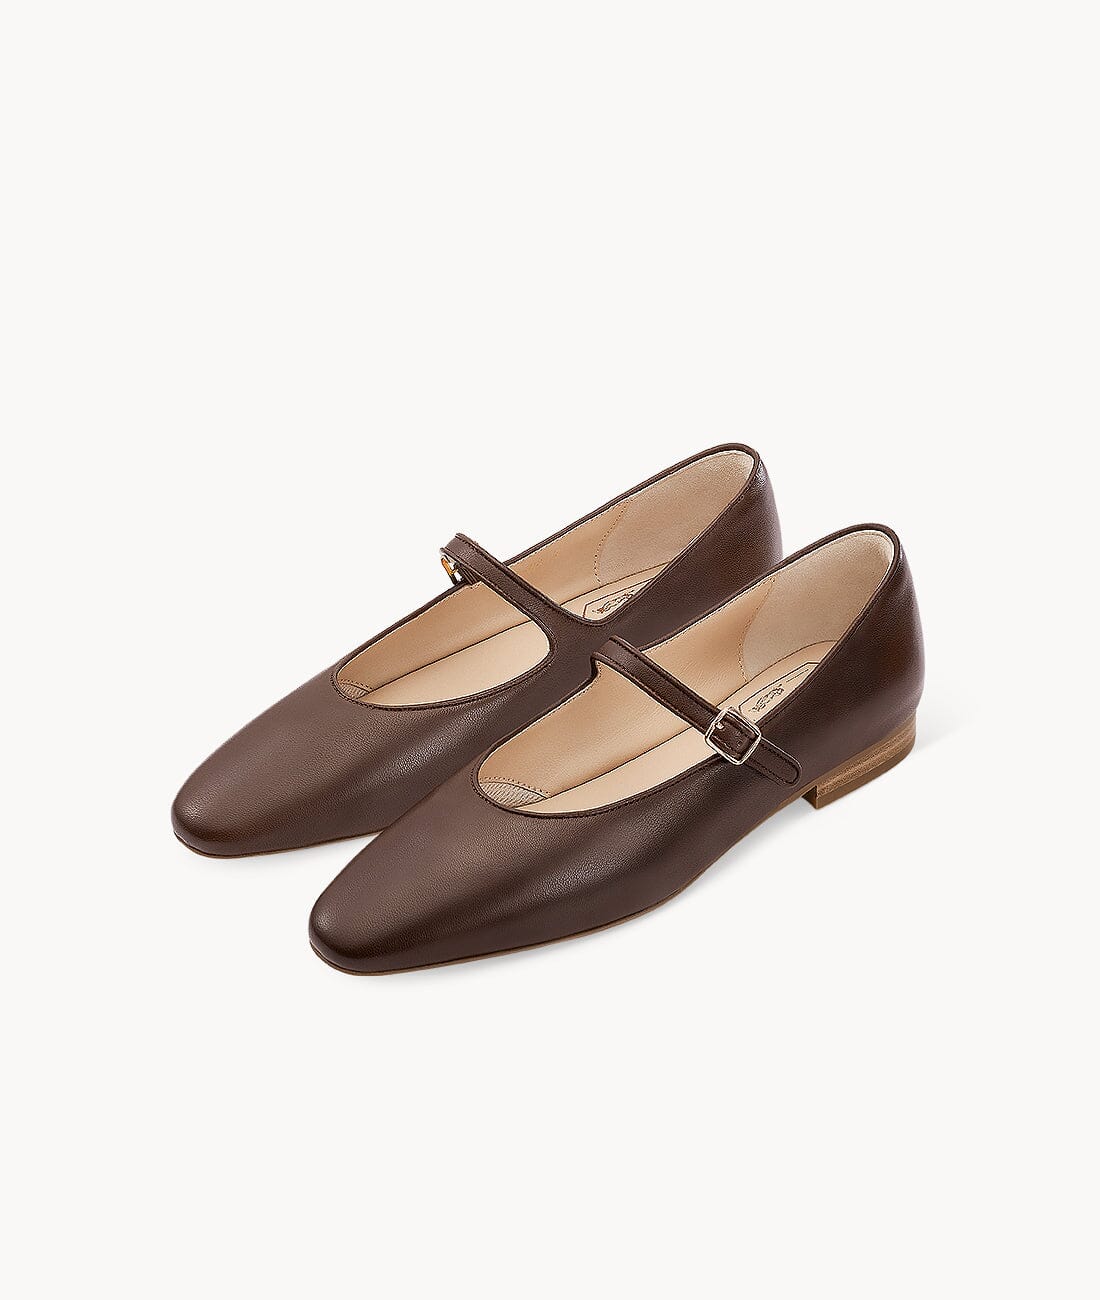 7or9 - Coffee Candy - Flats&Loafers